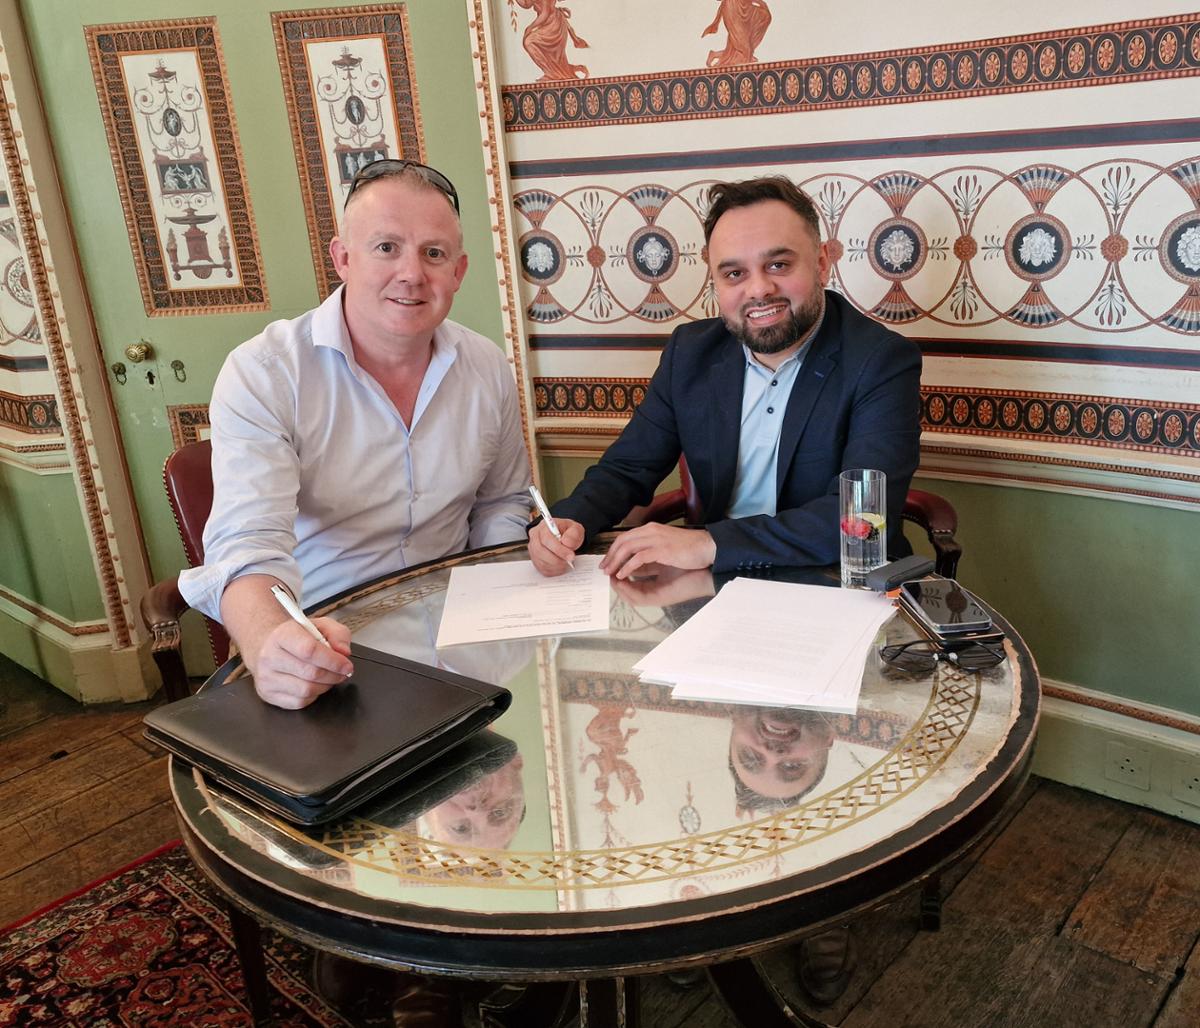 Elliot Walker, co-founder of The Massage Company (L), and Adeel Ashgar, head of brands at Franchise& (R), signing the new Scottish deal / 